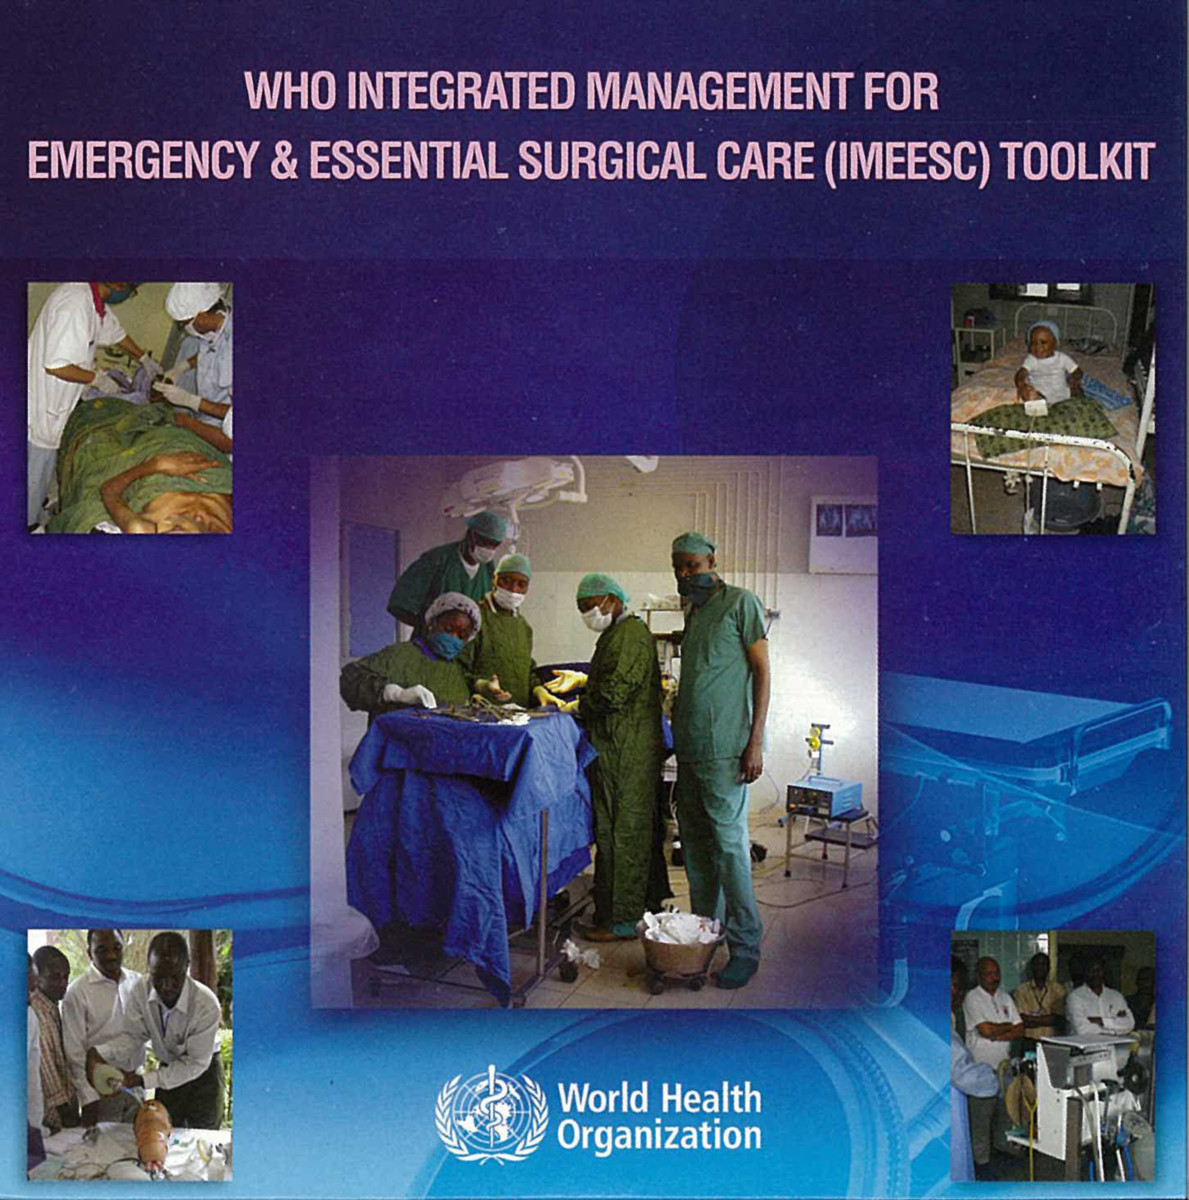 WHO Integrated Management for Emergency and Essential Surgical Care Tool Kit